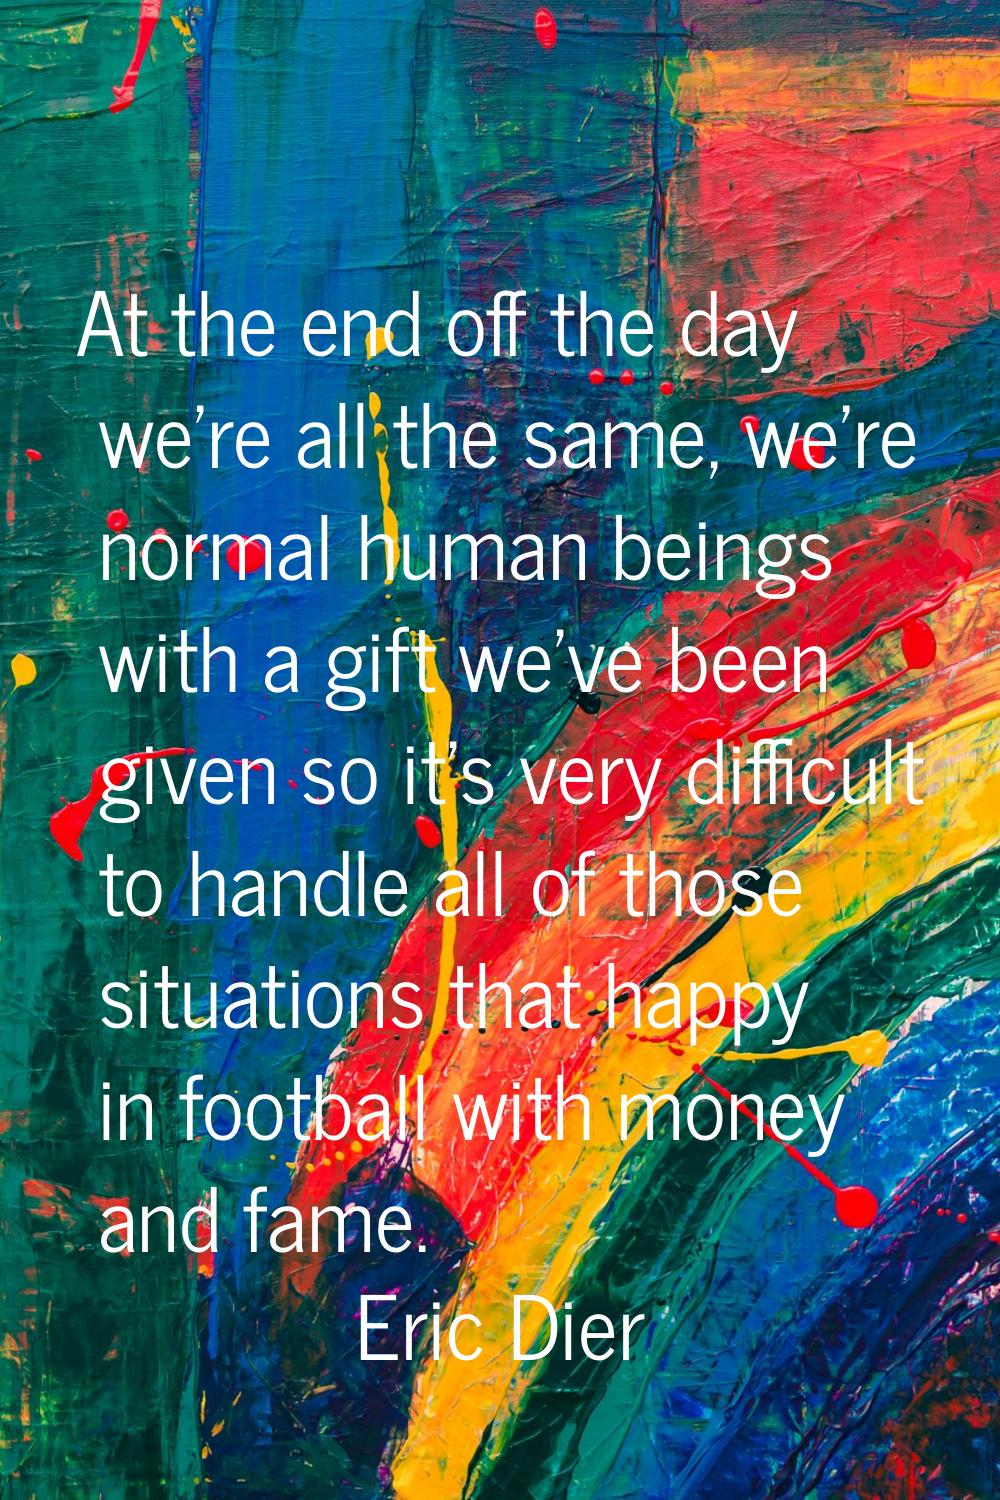 At the end off the day we're all the same, we're normal human beings with a gift we've been given s